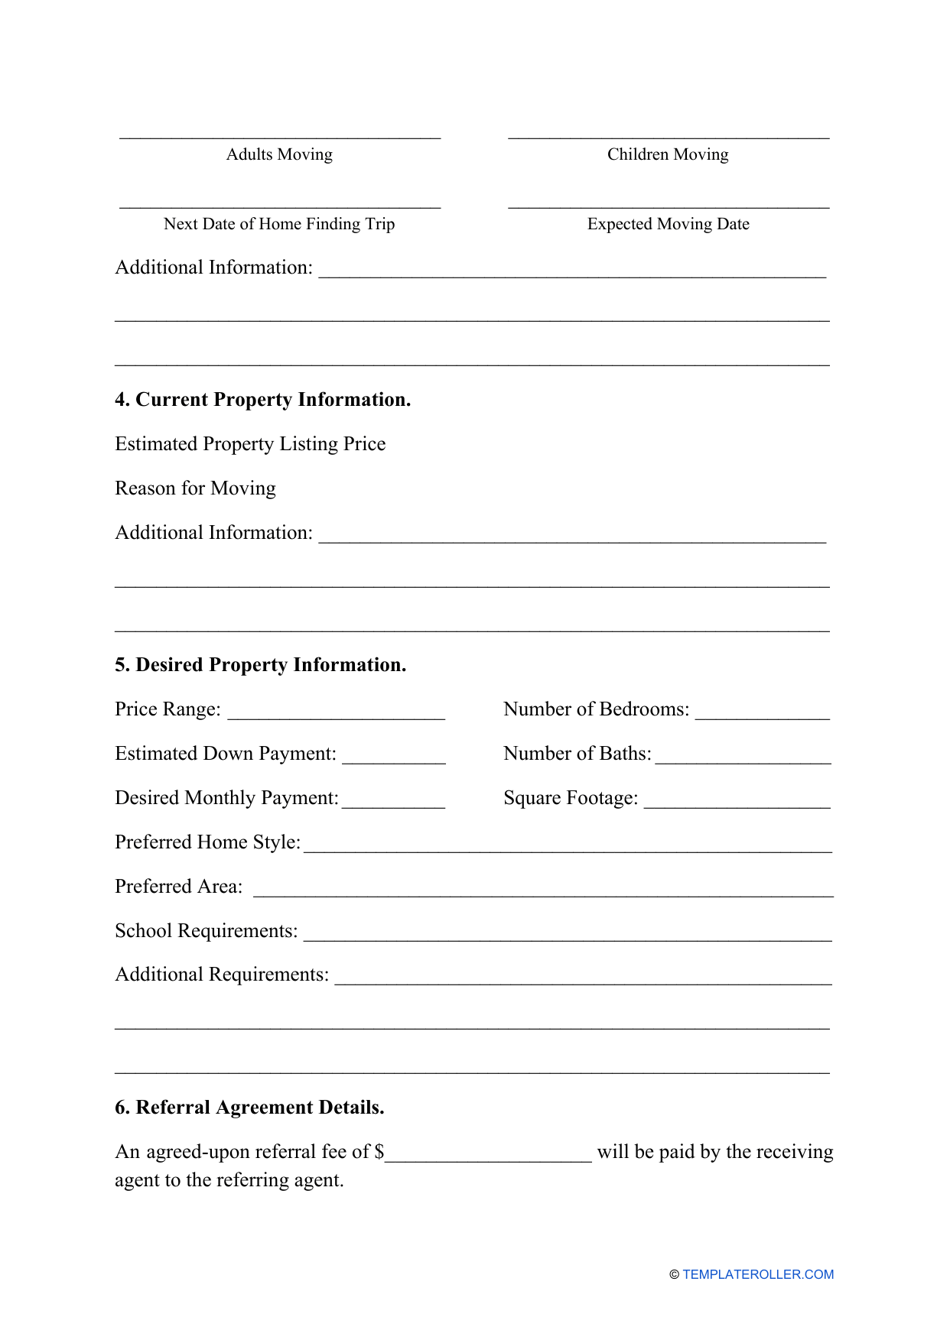 Real Estate Referral Form Fill Out Sign Online And Download PDF Templateroller